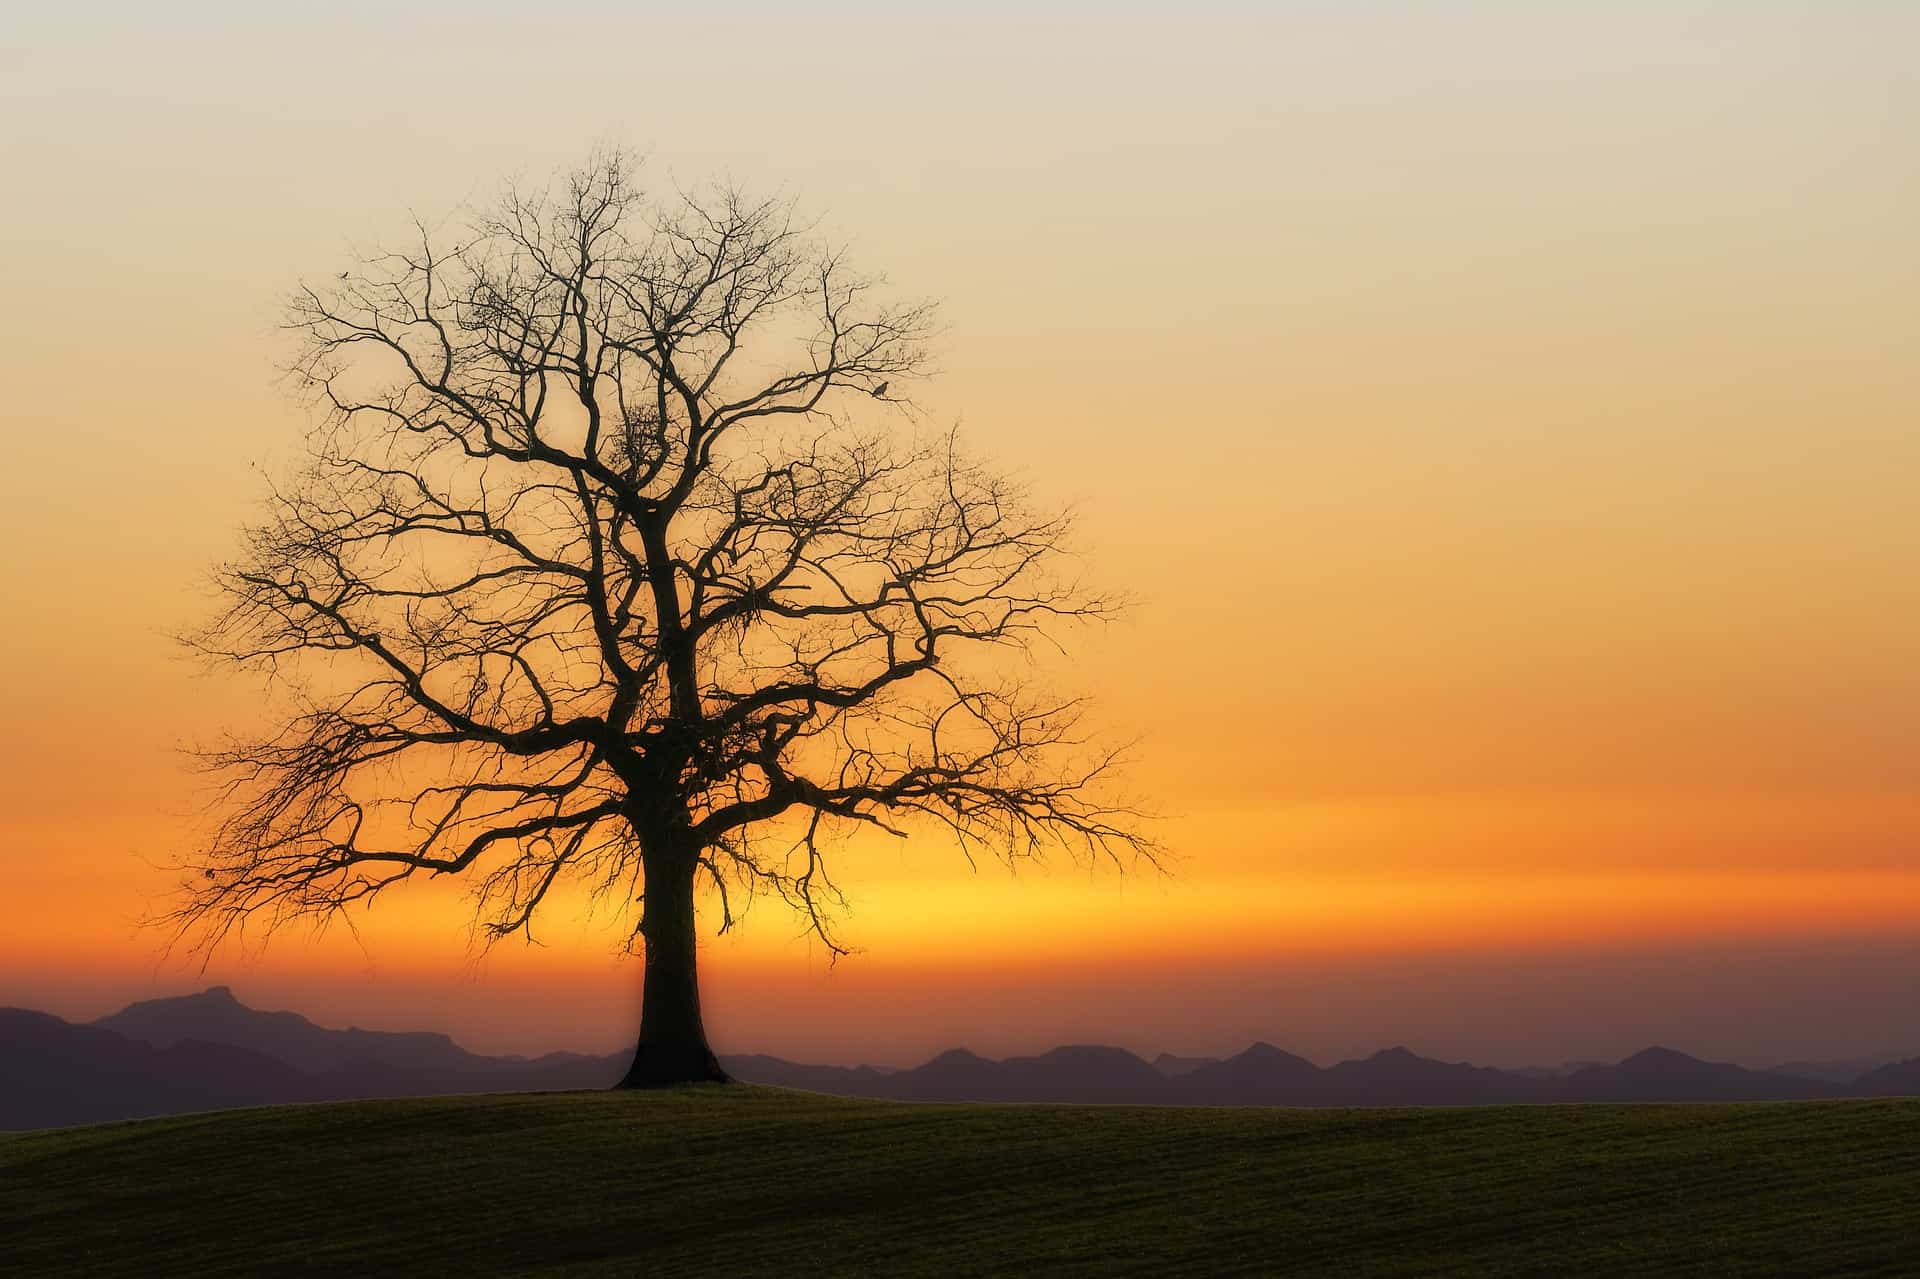 A single bare winter tree stands in a field with misty sunset colors in background